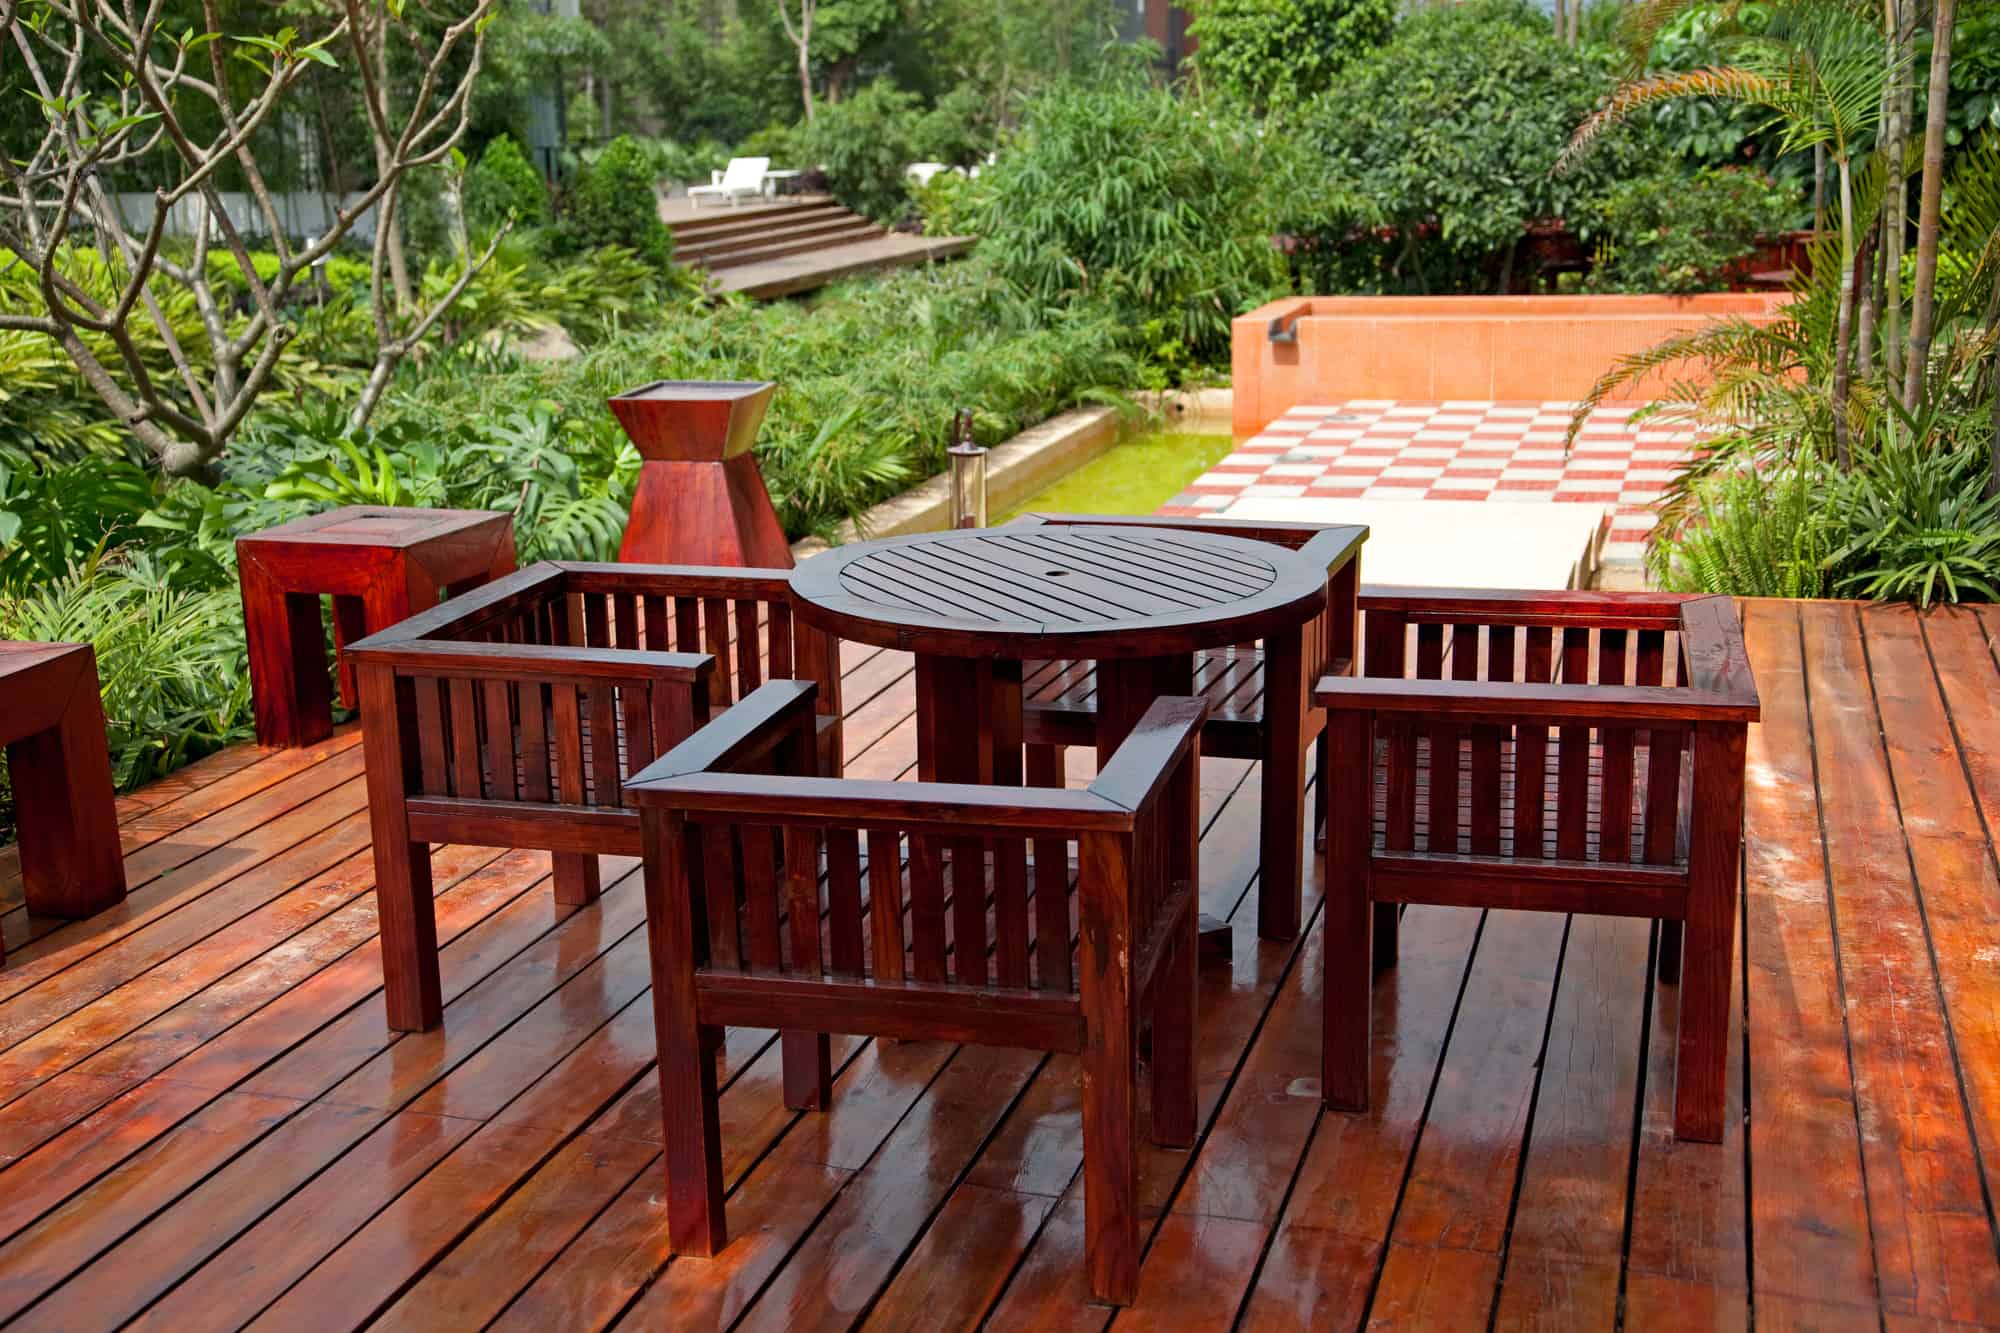 Patio Furniture Materials Ranked by Durability